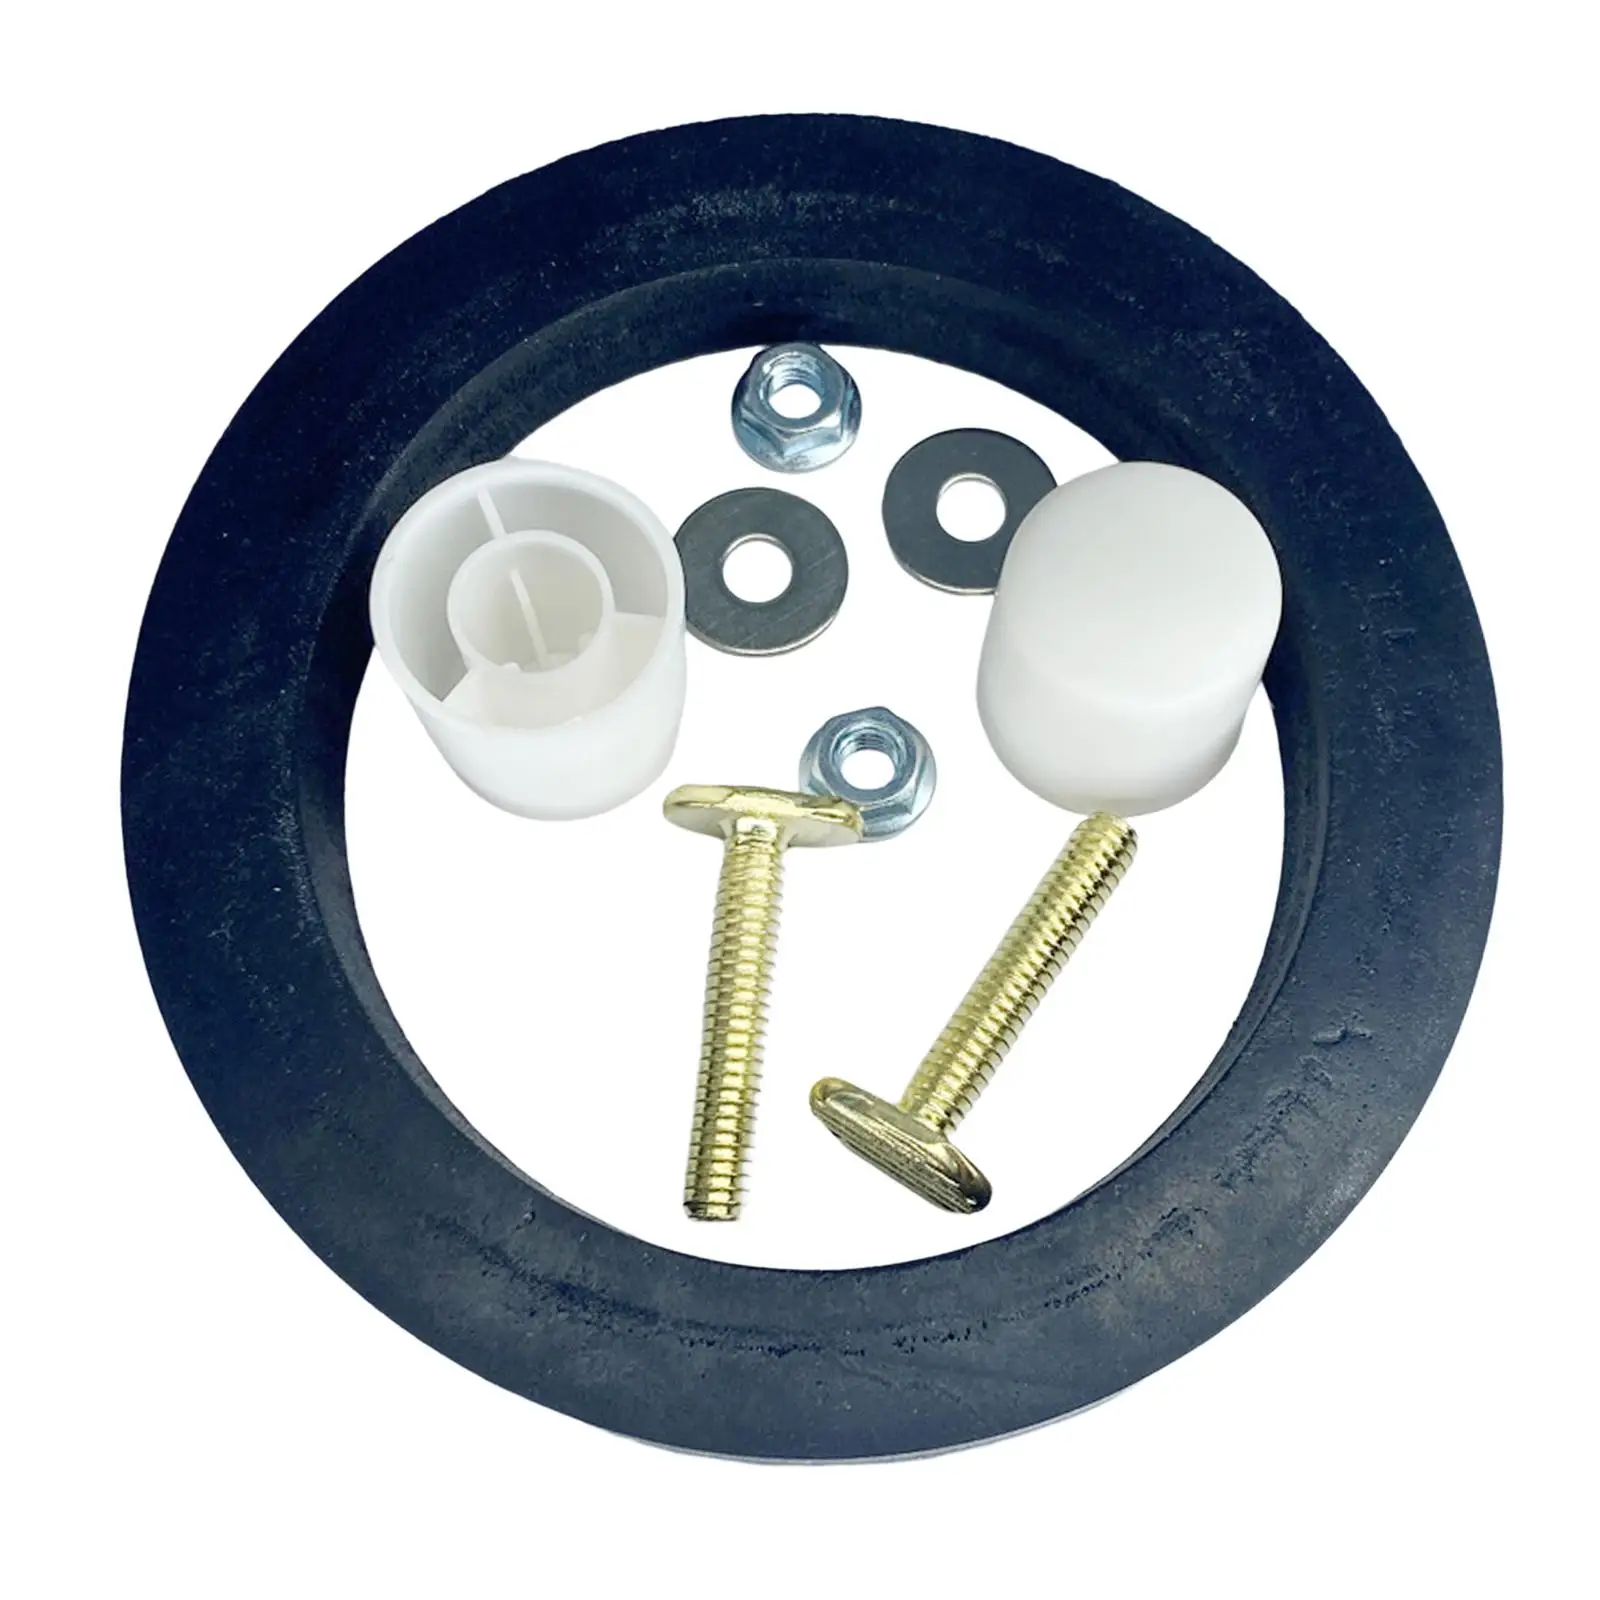 RV Toilet Parts Seal Kit for 300, 310, 320 Series Easy to Install Practical